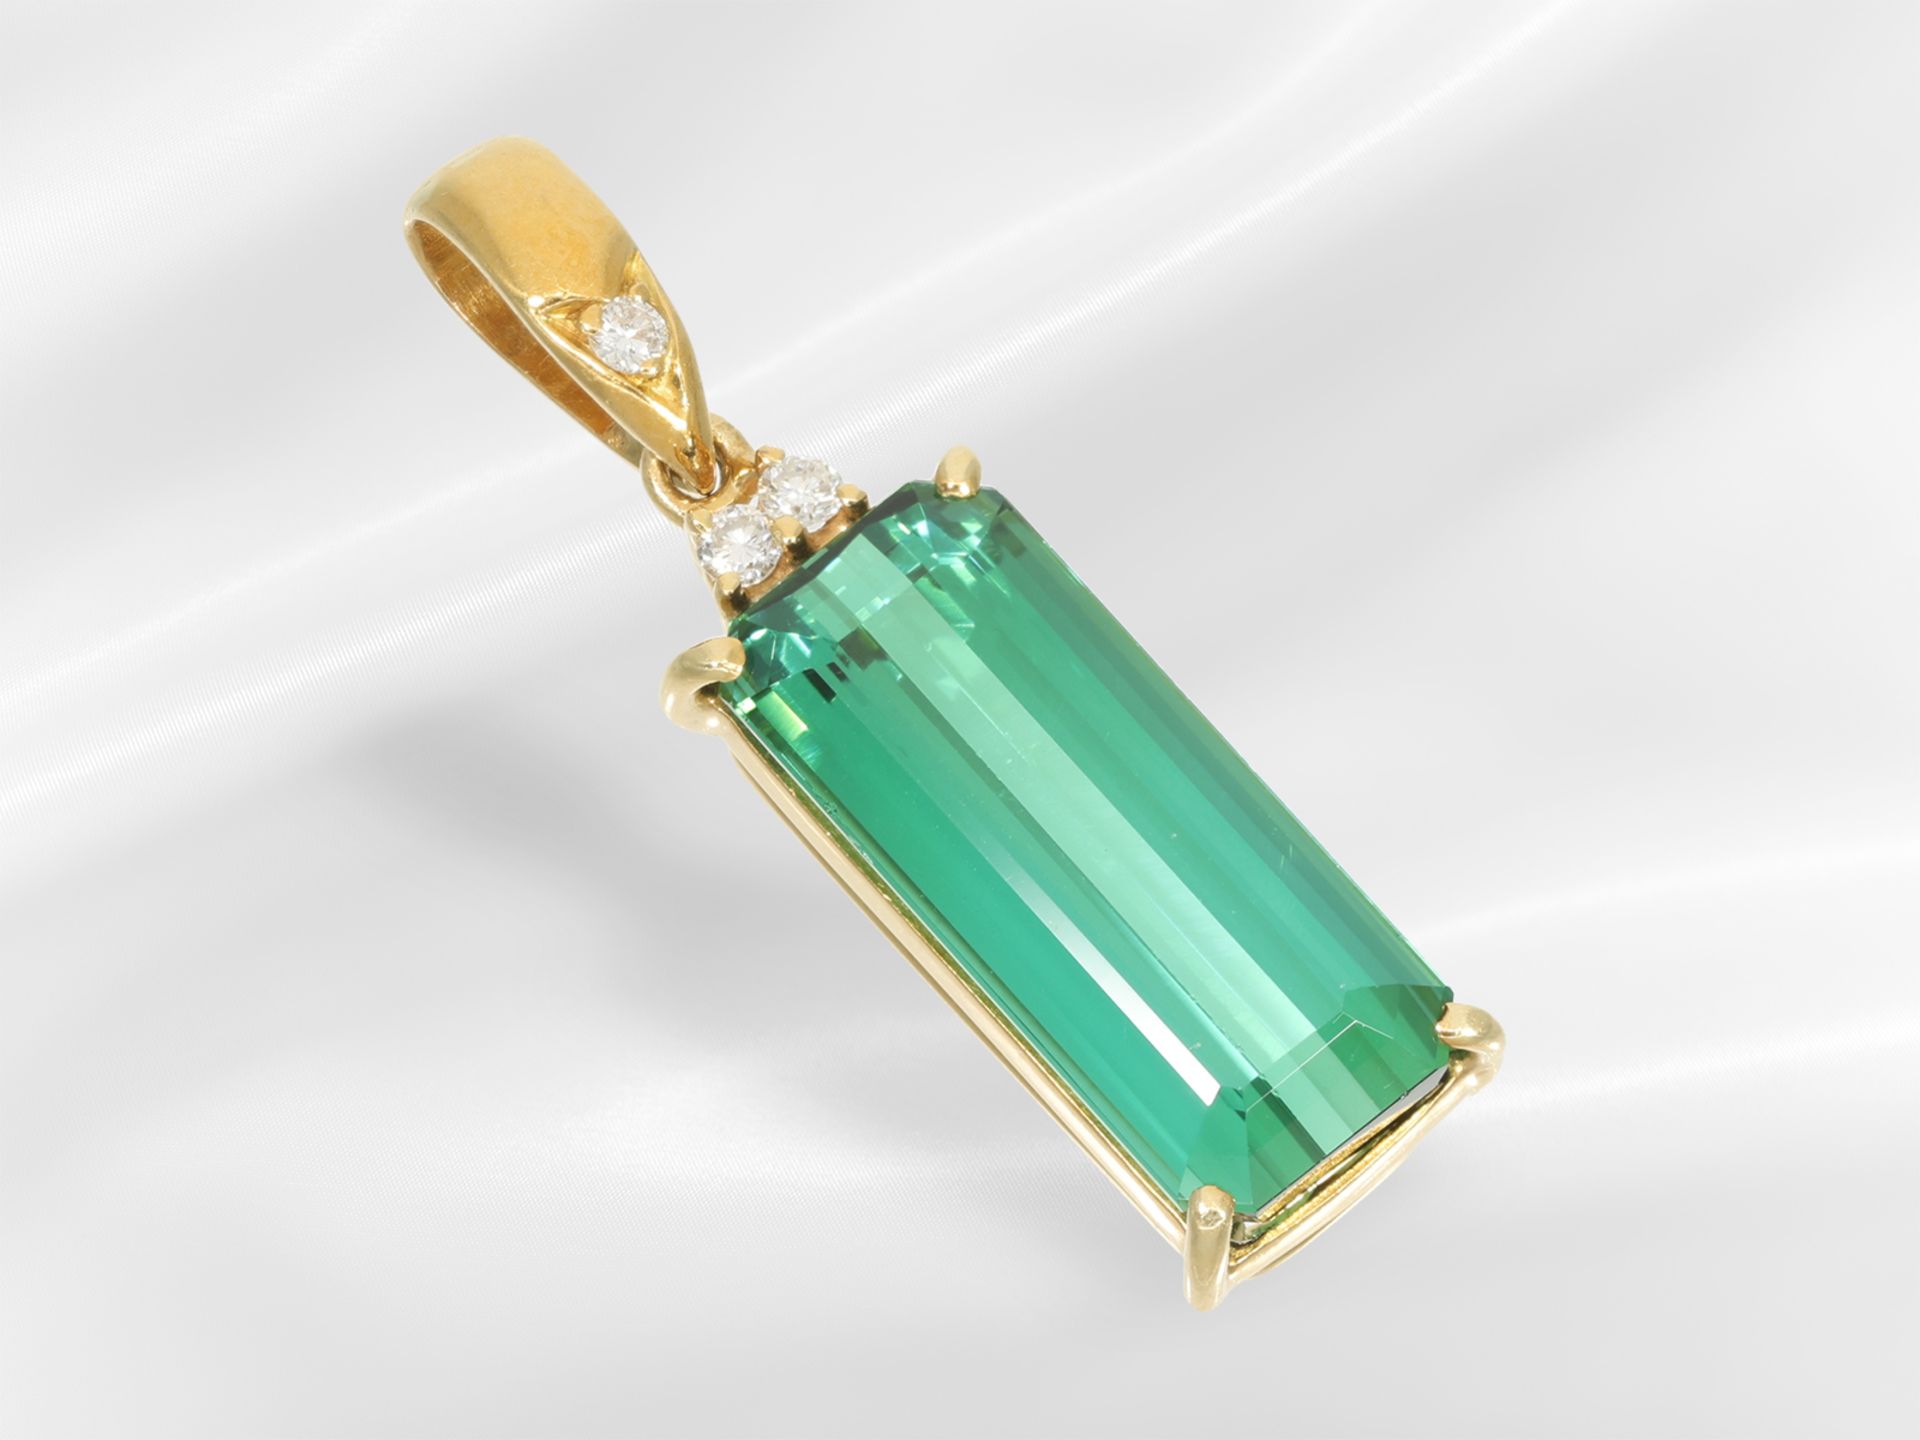 Pendant: goldsmith work with a fine tourmaline of approx. 8.77ct and brilliant-cut diamonds - Image 4 of 4